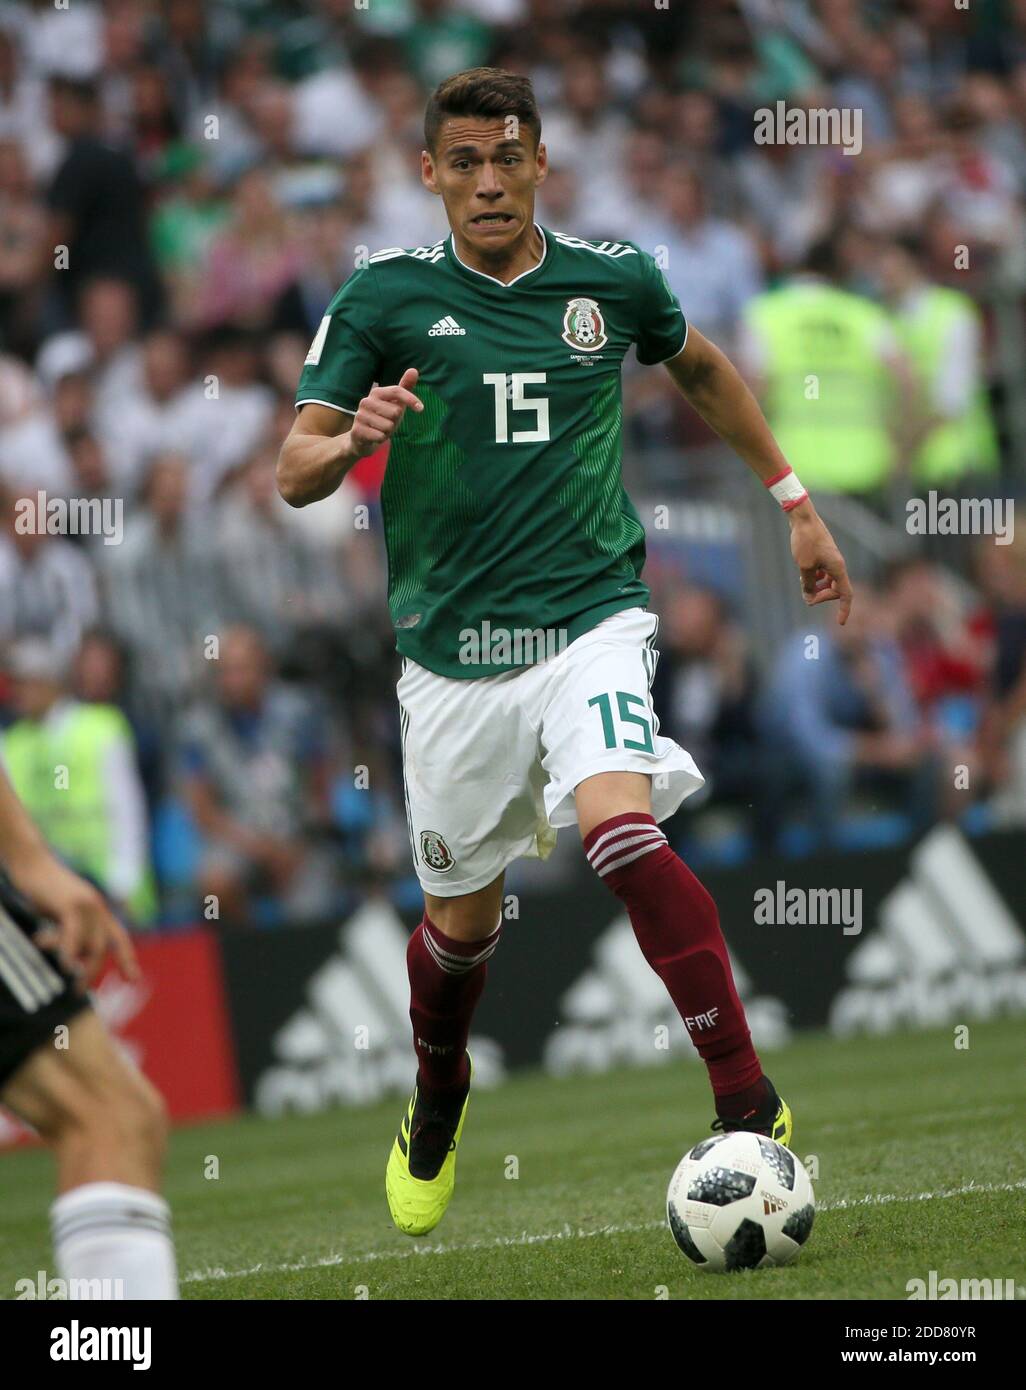 Hector Moreno of Mexico during the 2018 FIFA World Cup Russia game, Germany vs Mexico in Luzhniky Stadium, Moscow, Russia on June 17, 2018. Mexico won 1-0. Photo by Giuliano Bevilacqua/ABACAPRESS.COM Stock Photo